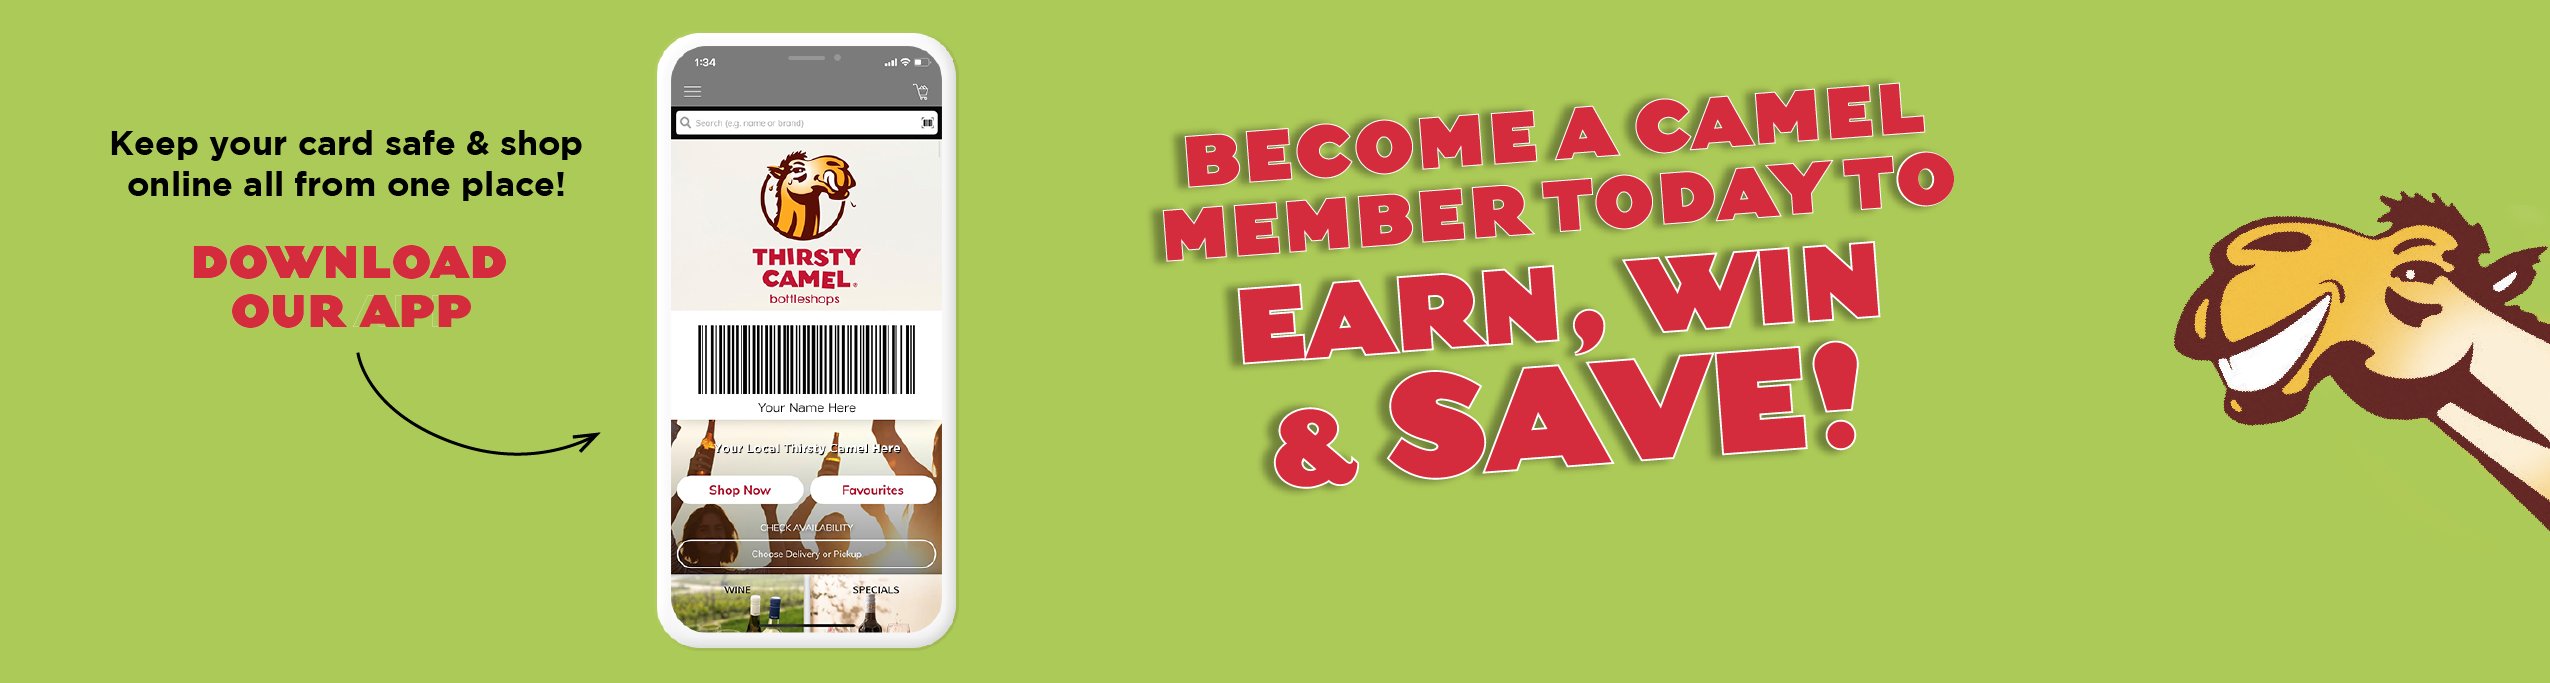 become a member and save